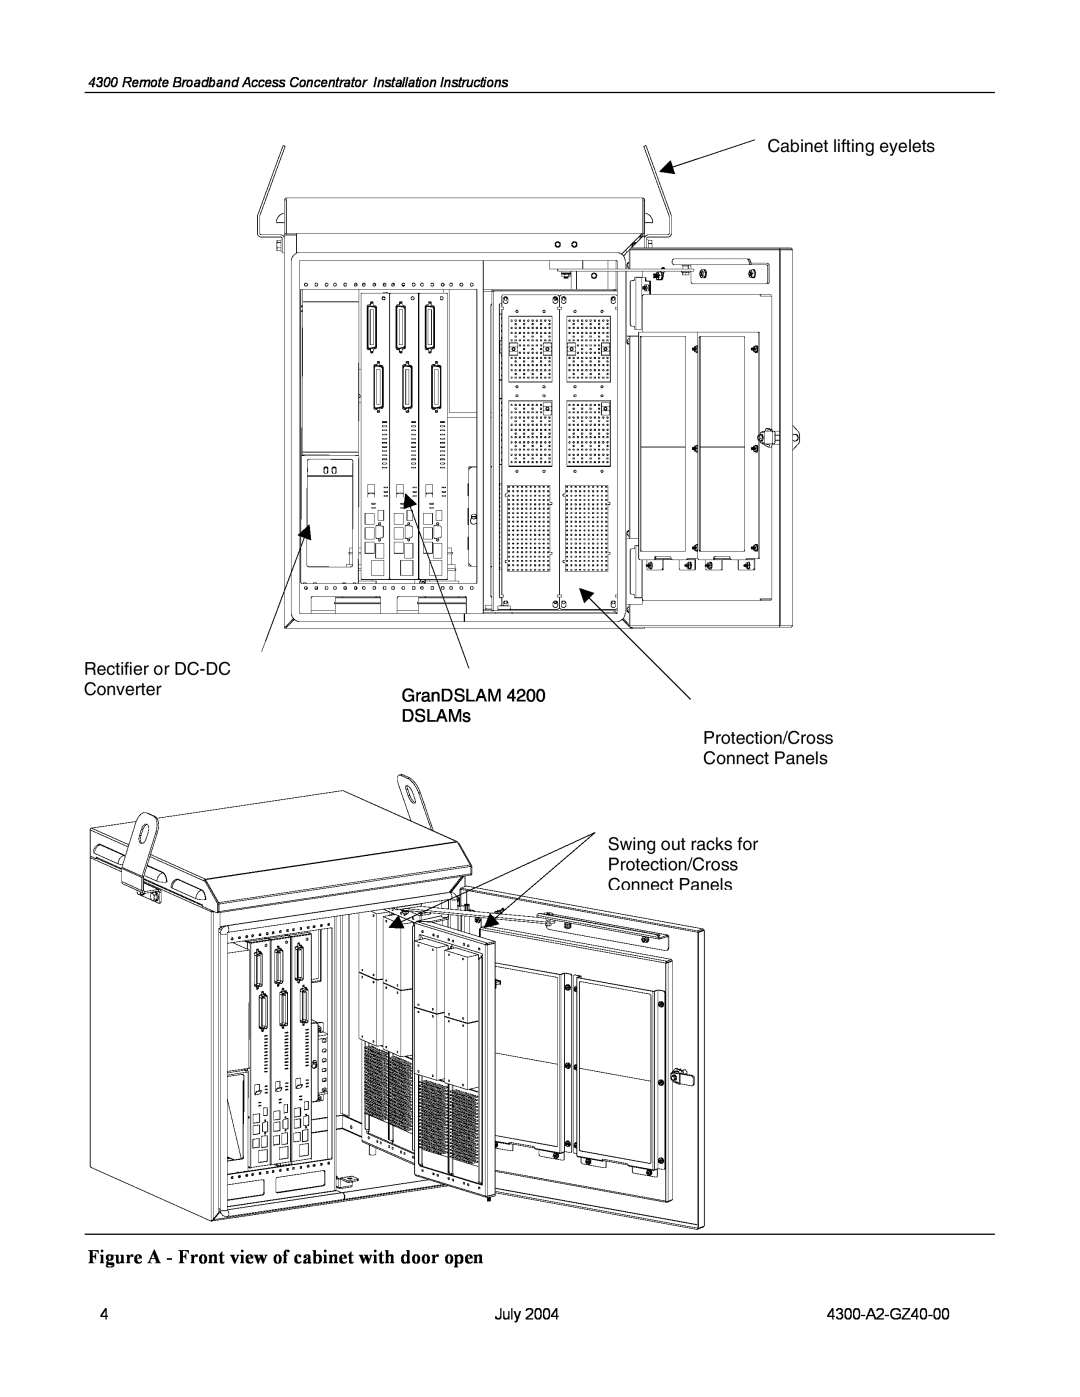 Paradyne Figure A - Front view of cabinet with door open, Rectifier or DC-DC Converter, July, 4300-A2-GZ40-00 